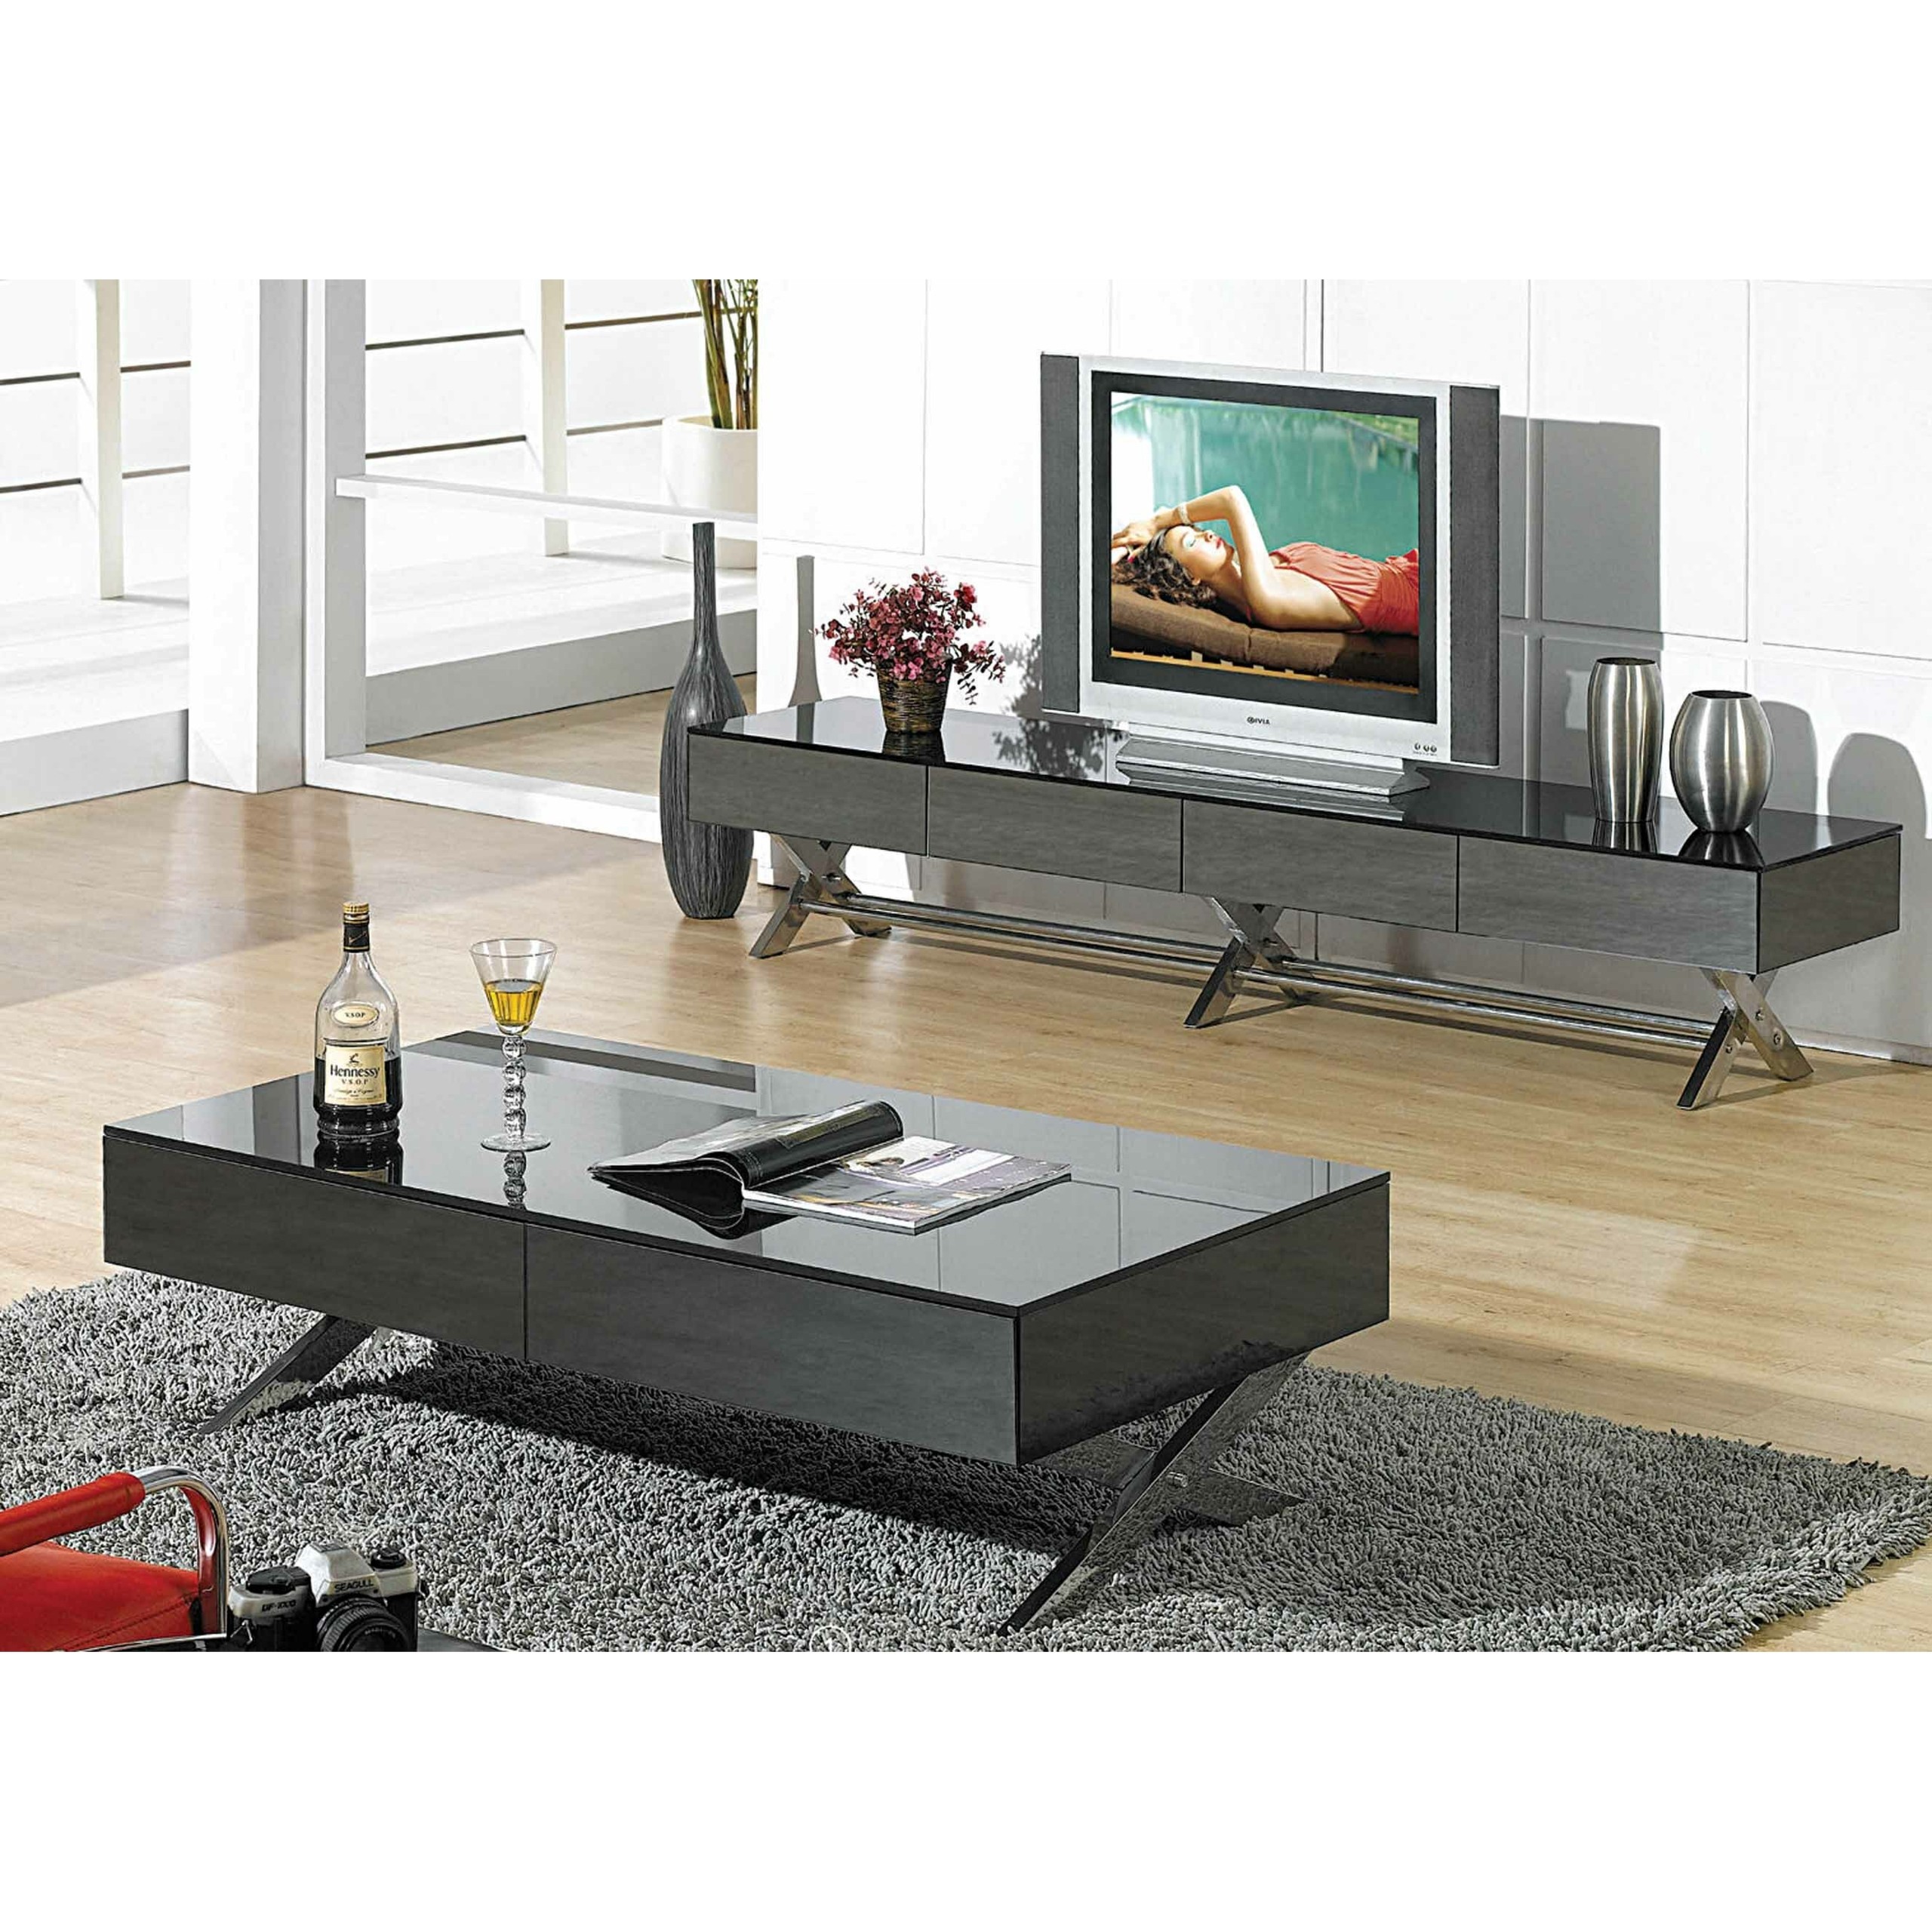 Tv stand back panel